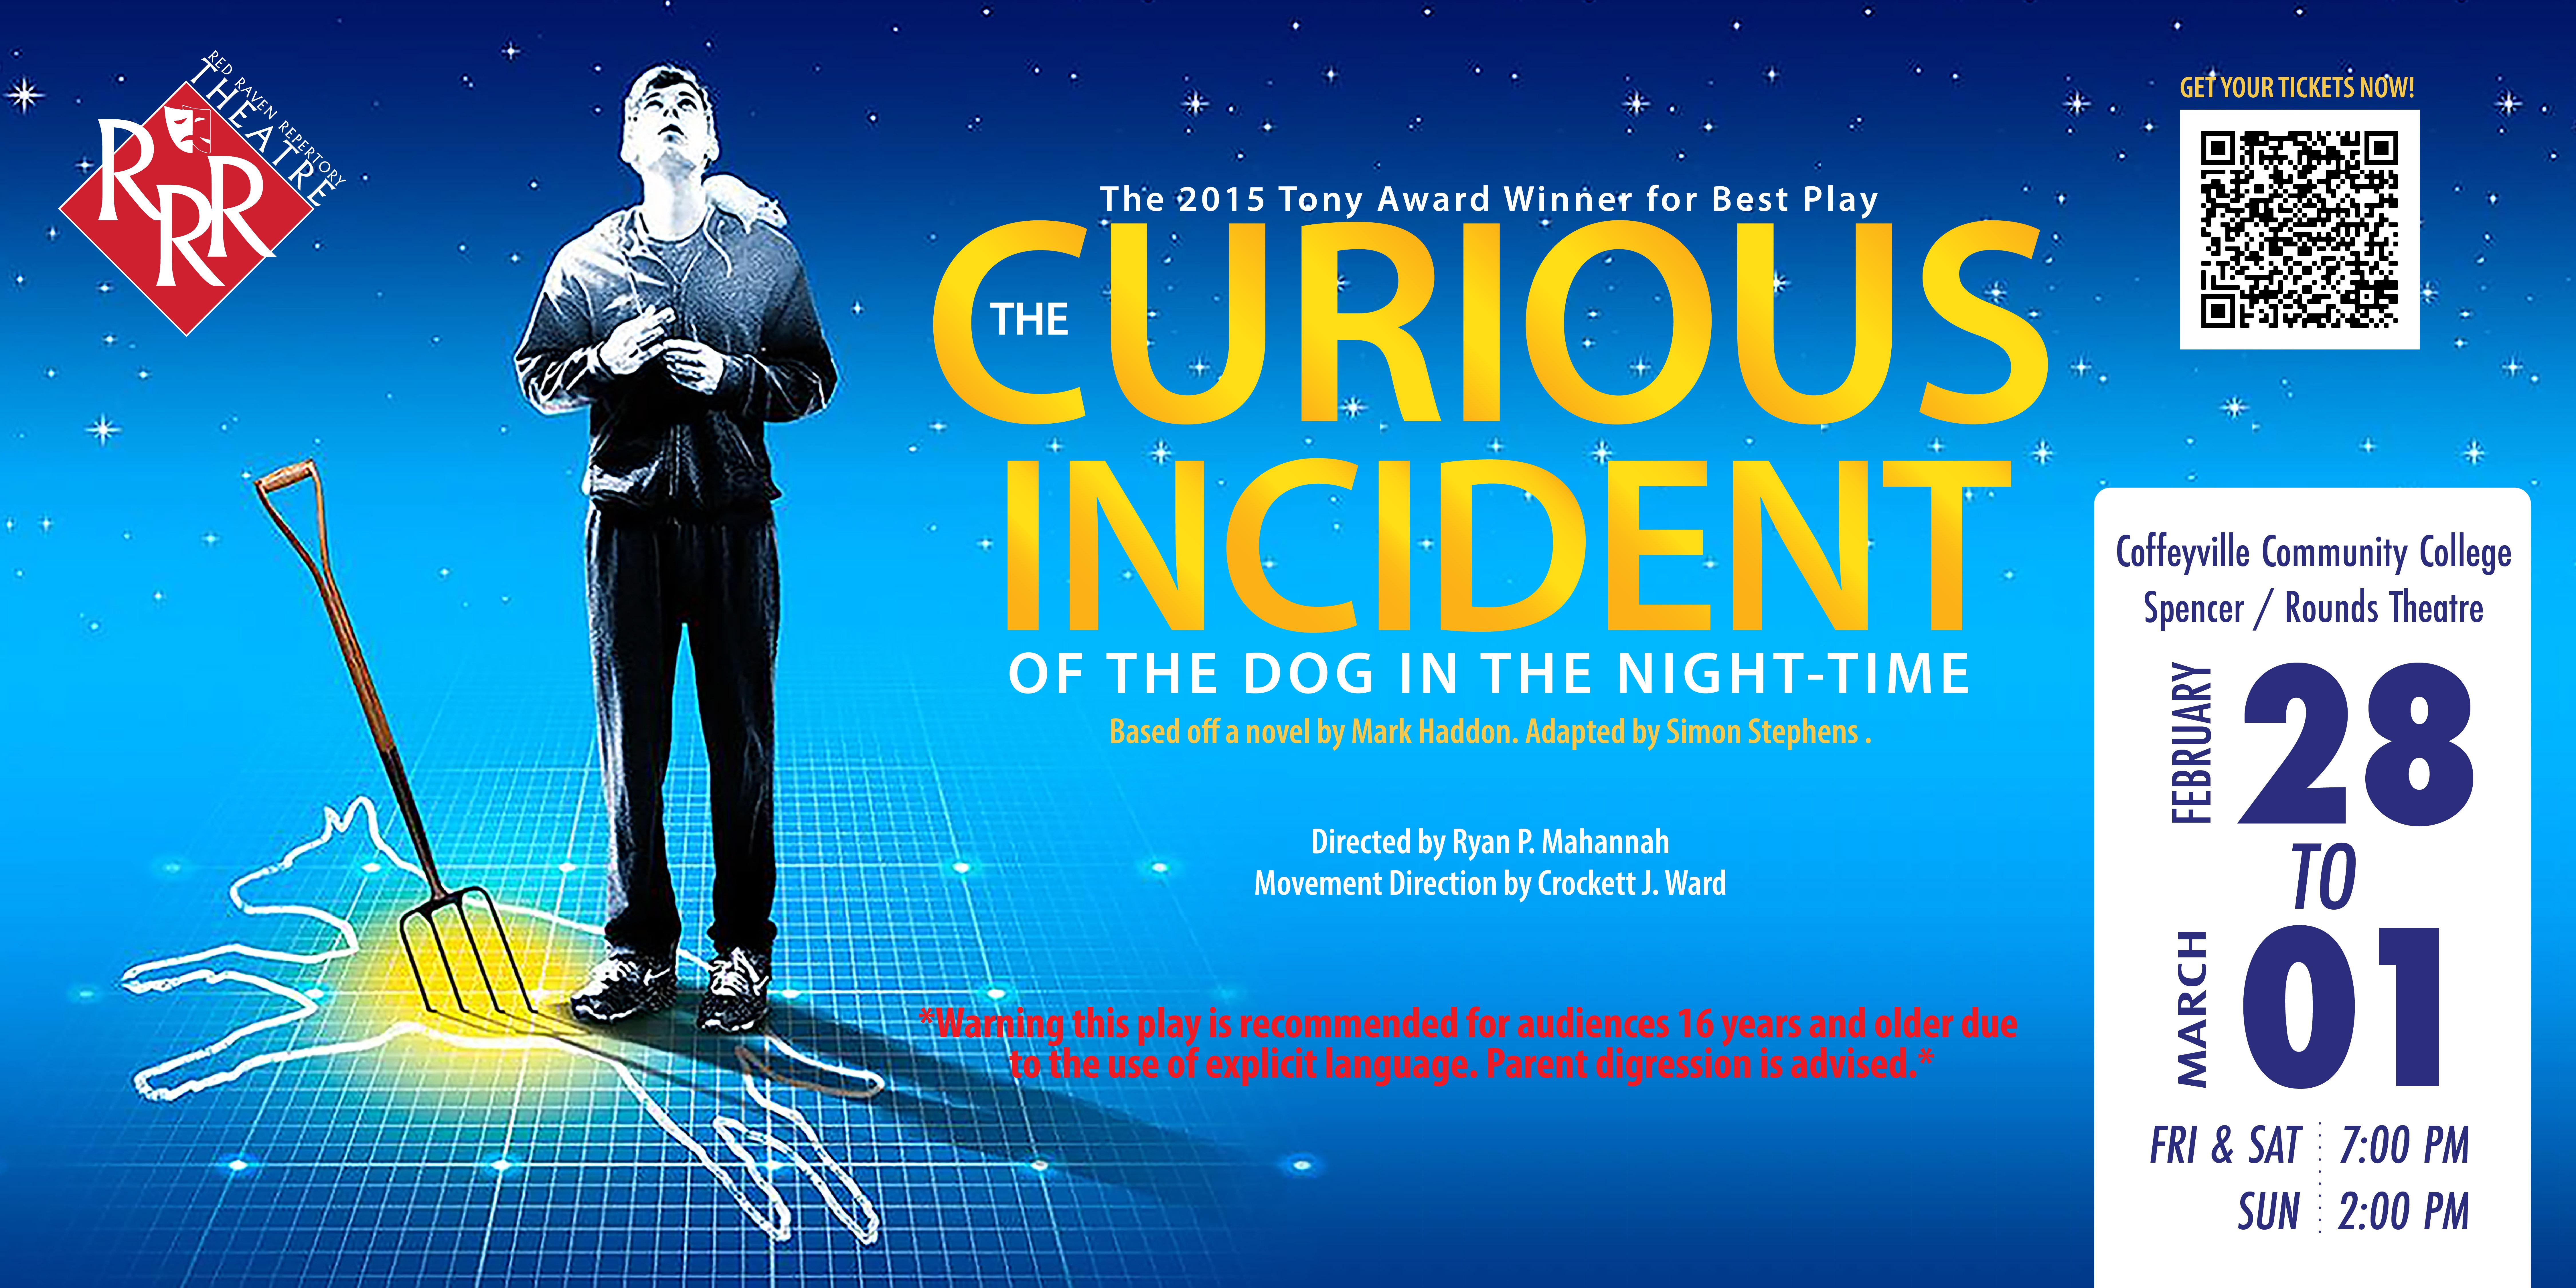 RRR Theatre Presents- The Curious Incident of the Dog in the Night-Time